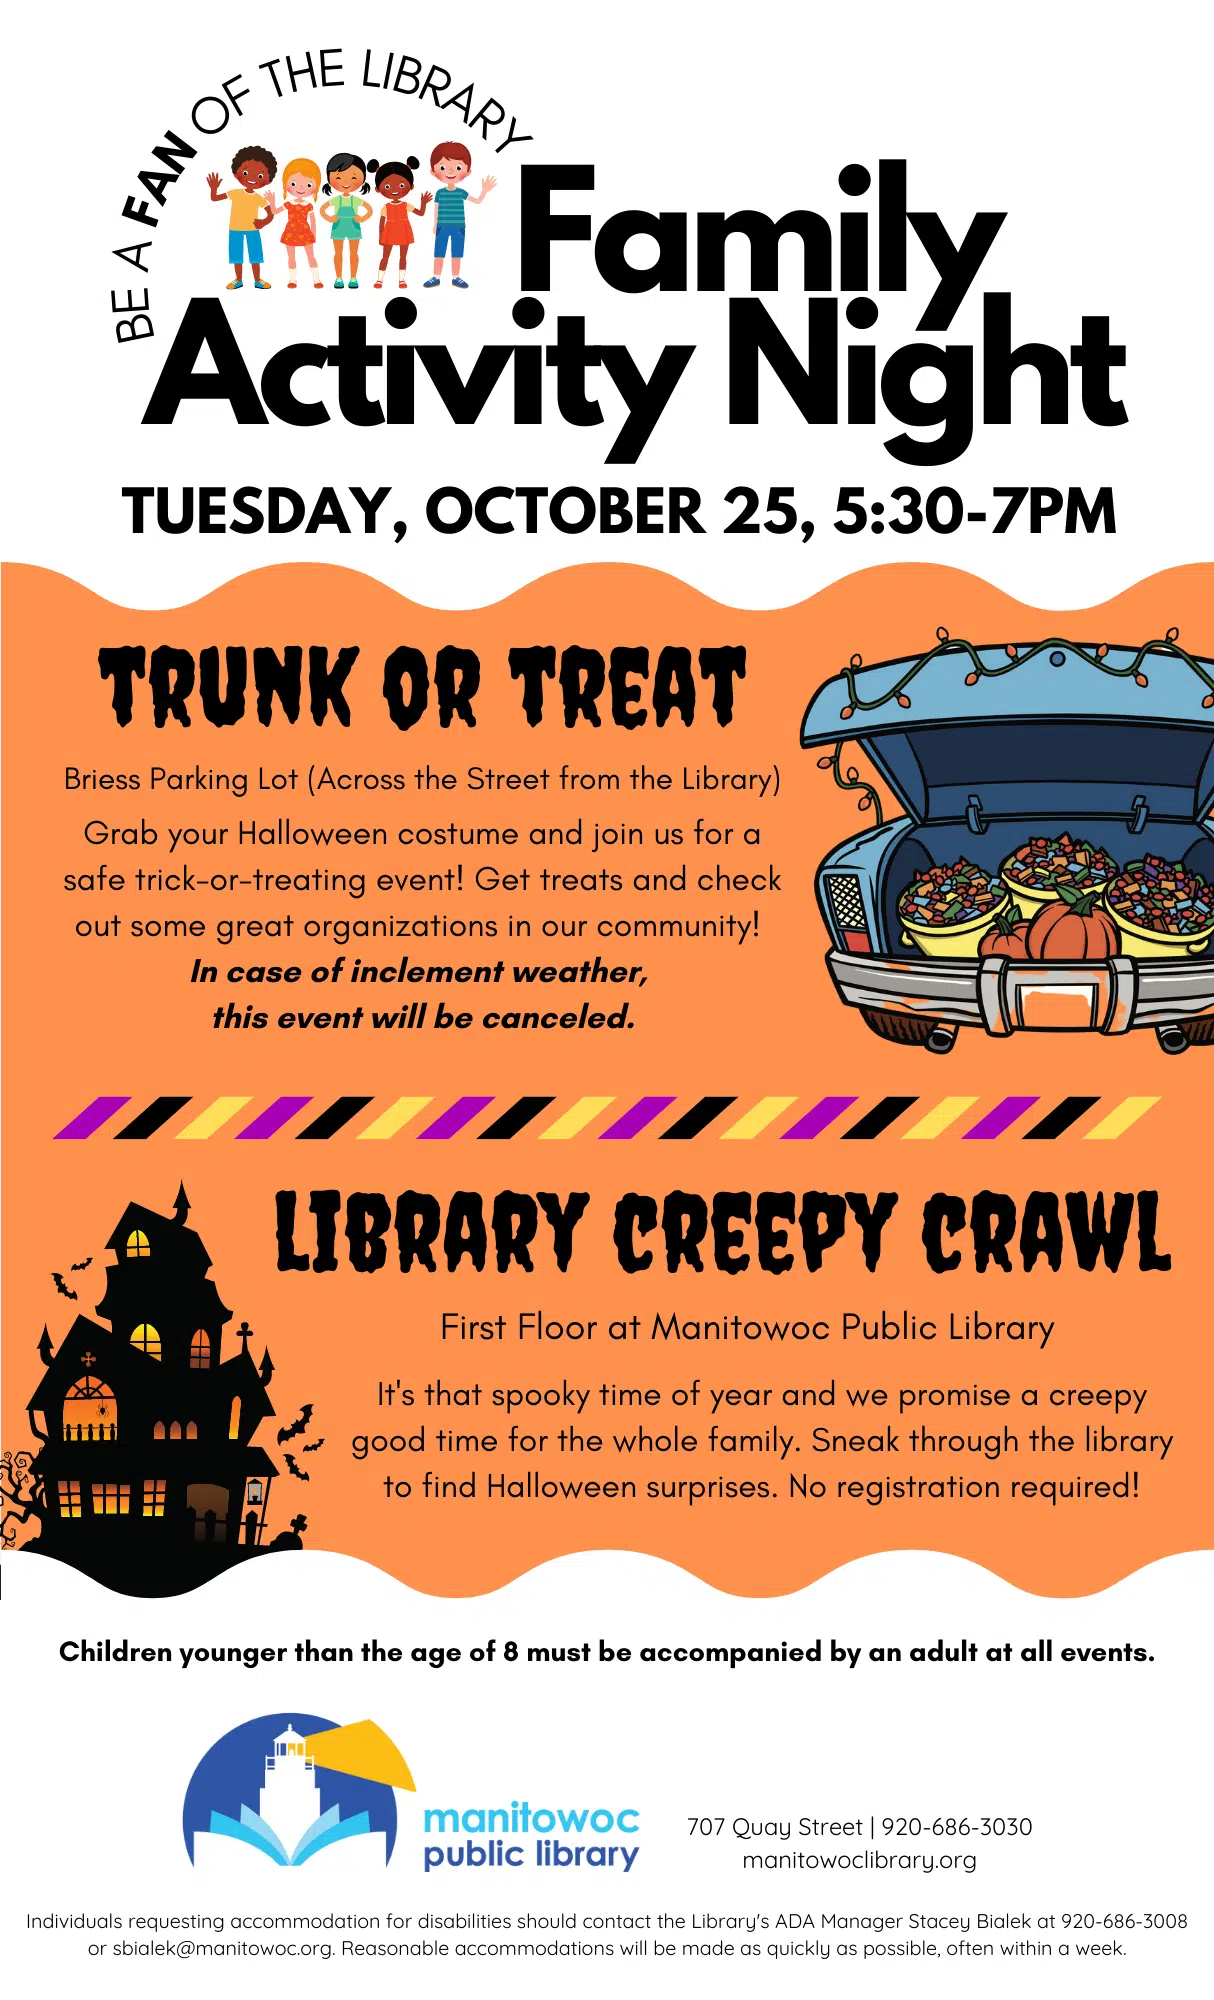 Manitowoc Public Library Ready to Celebrate Halloween